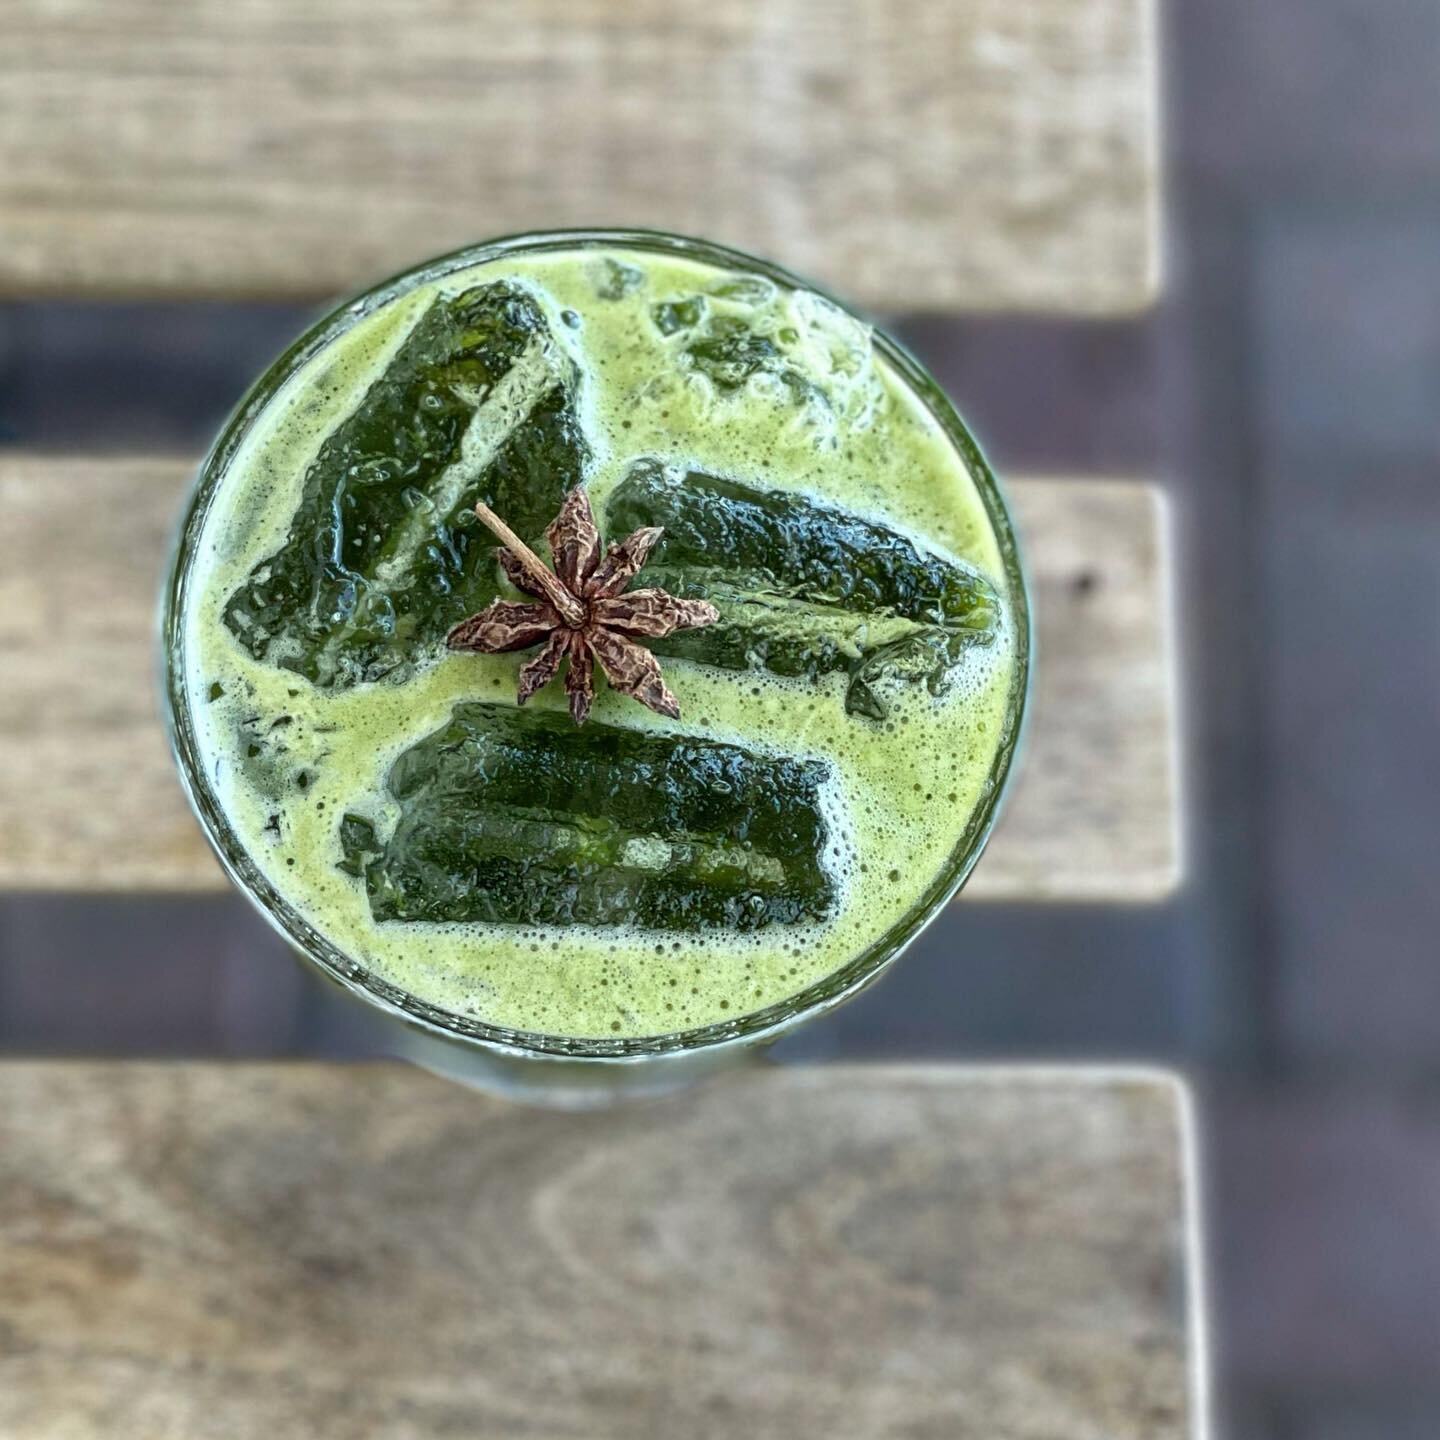 Matcha on another level @gillybrewbar
-
I always look forward to Gilly&rsquo;s seasonal elixirs, especially when it involves @mizubateaco matcha! Loved the combination of the spices, citrus &amp; matcha. And it felt nice to drink from a real glass in